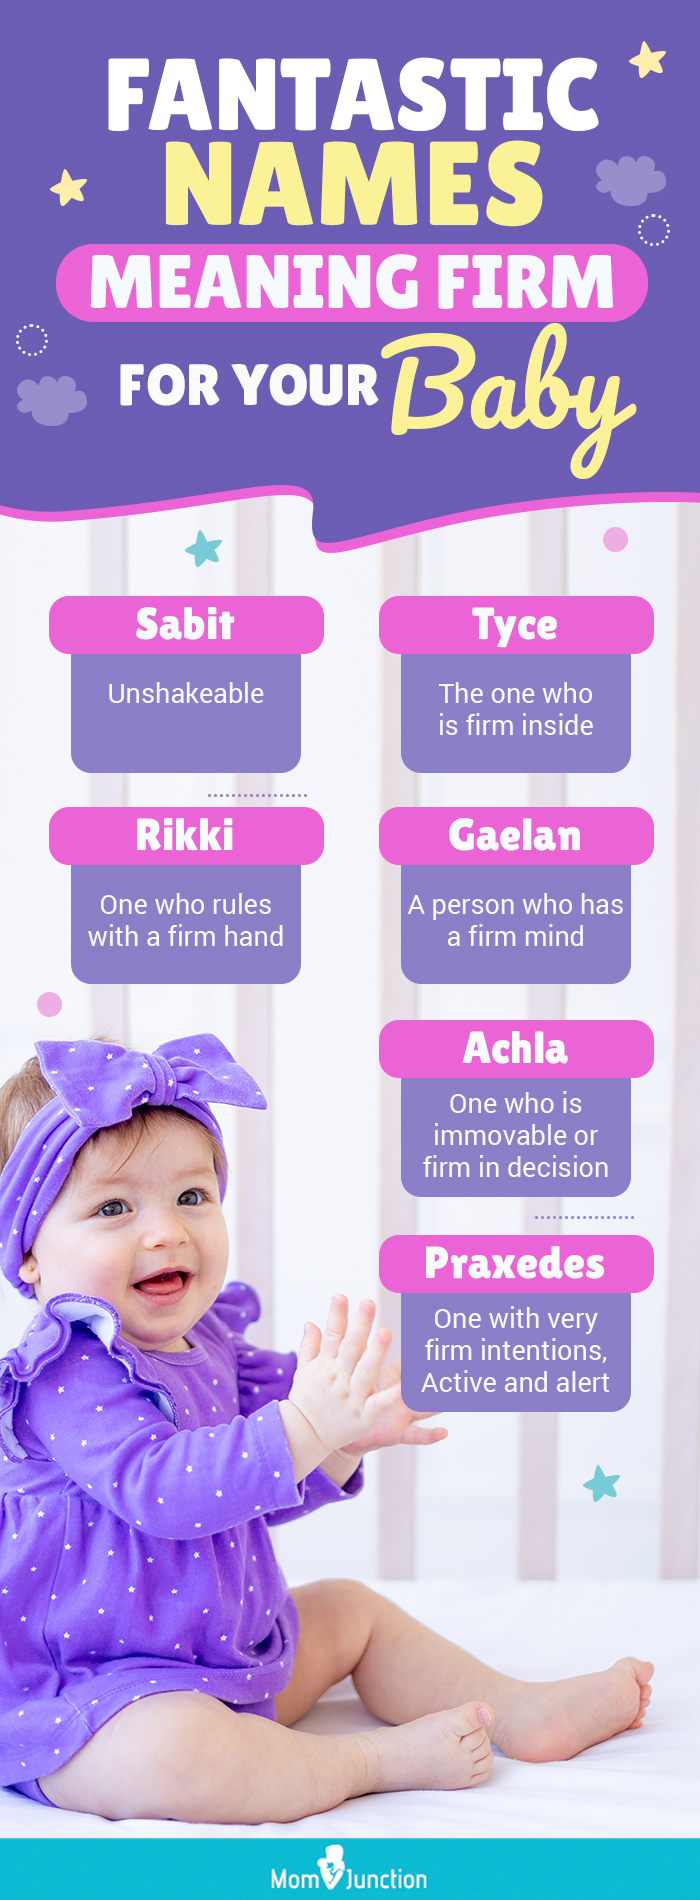 fantastic names meaning firm for your baby (infographic)